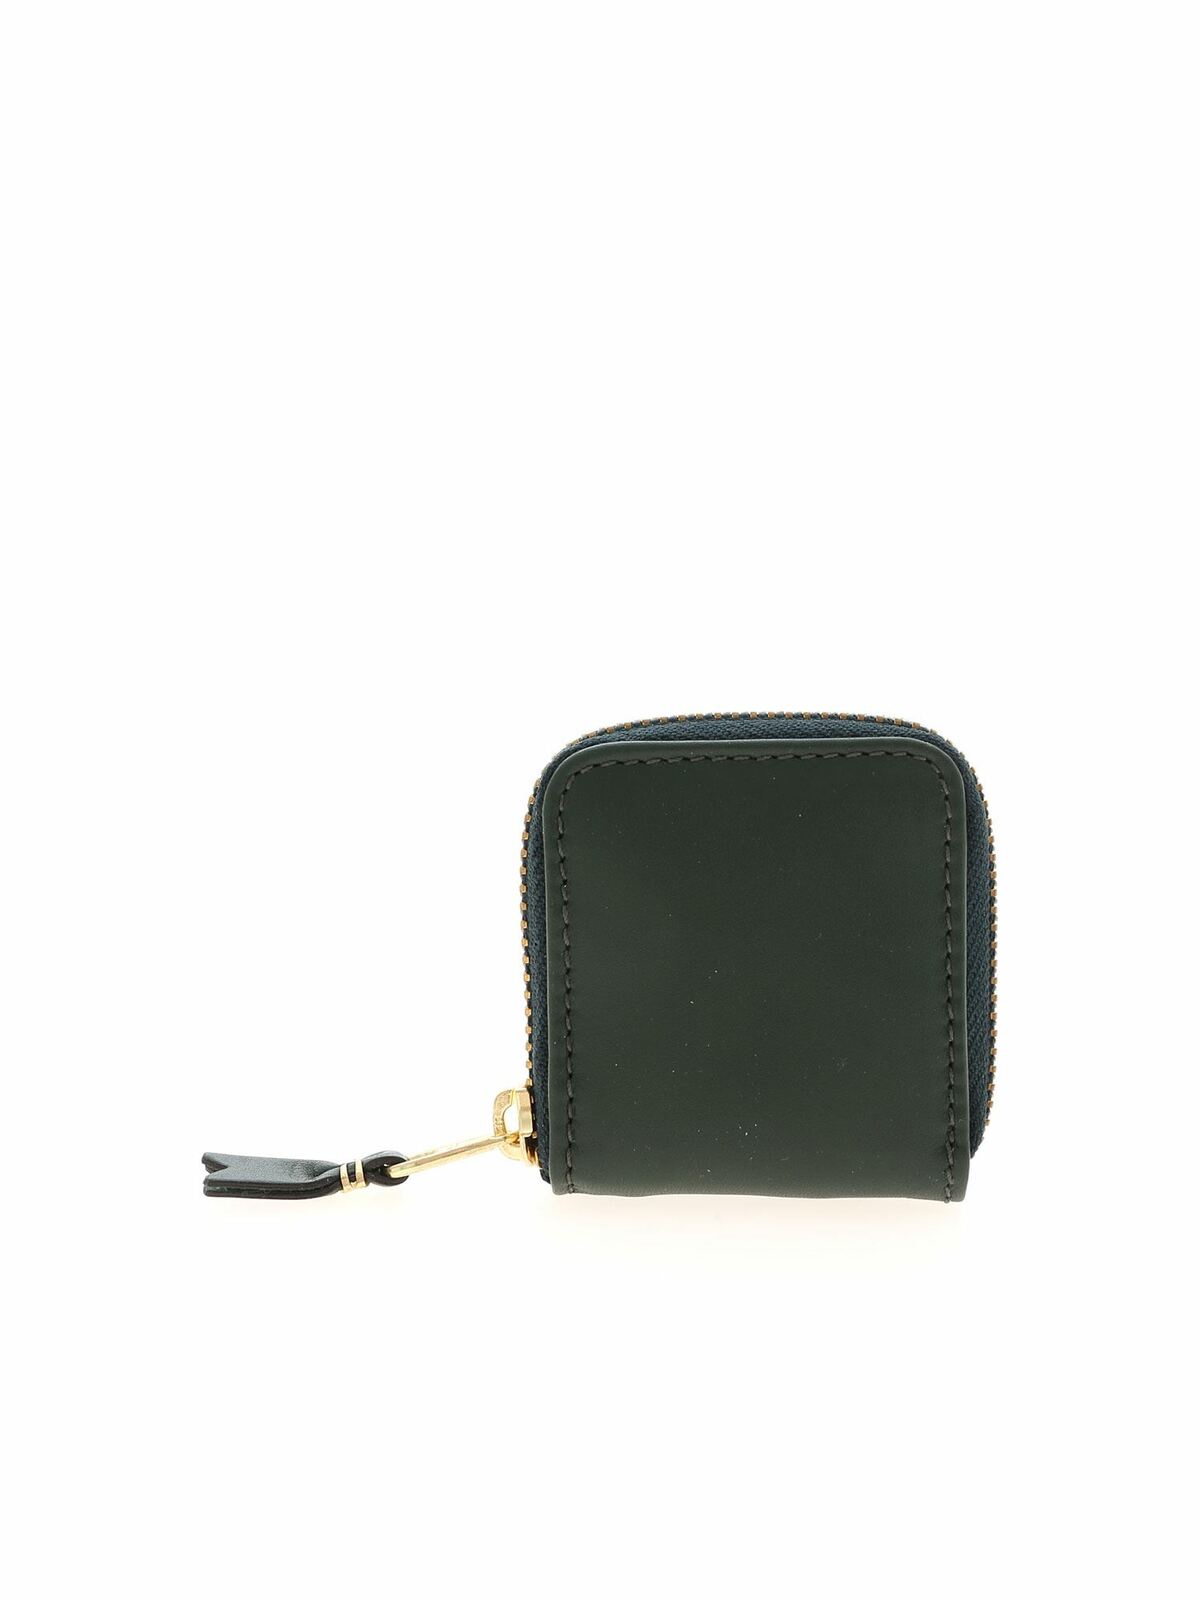 Comme Des Garçons Classic Leather Coin Purse In Dark Green